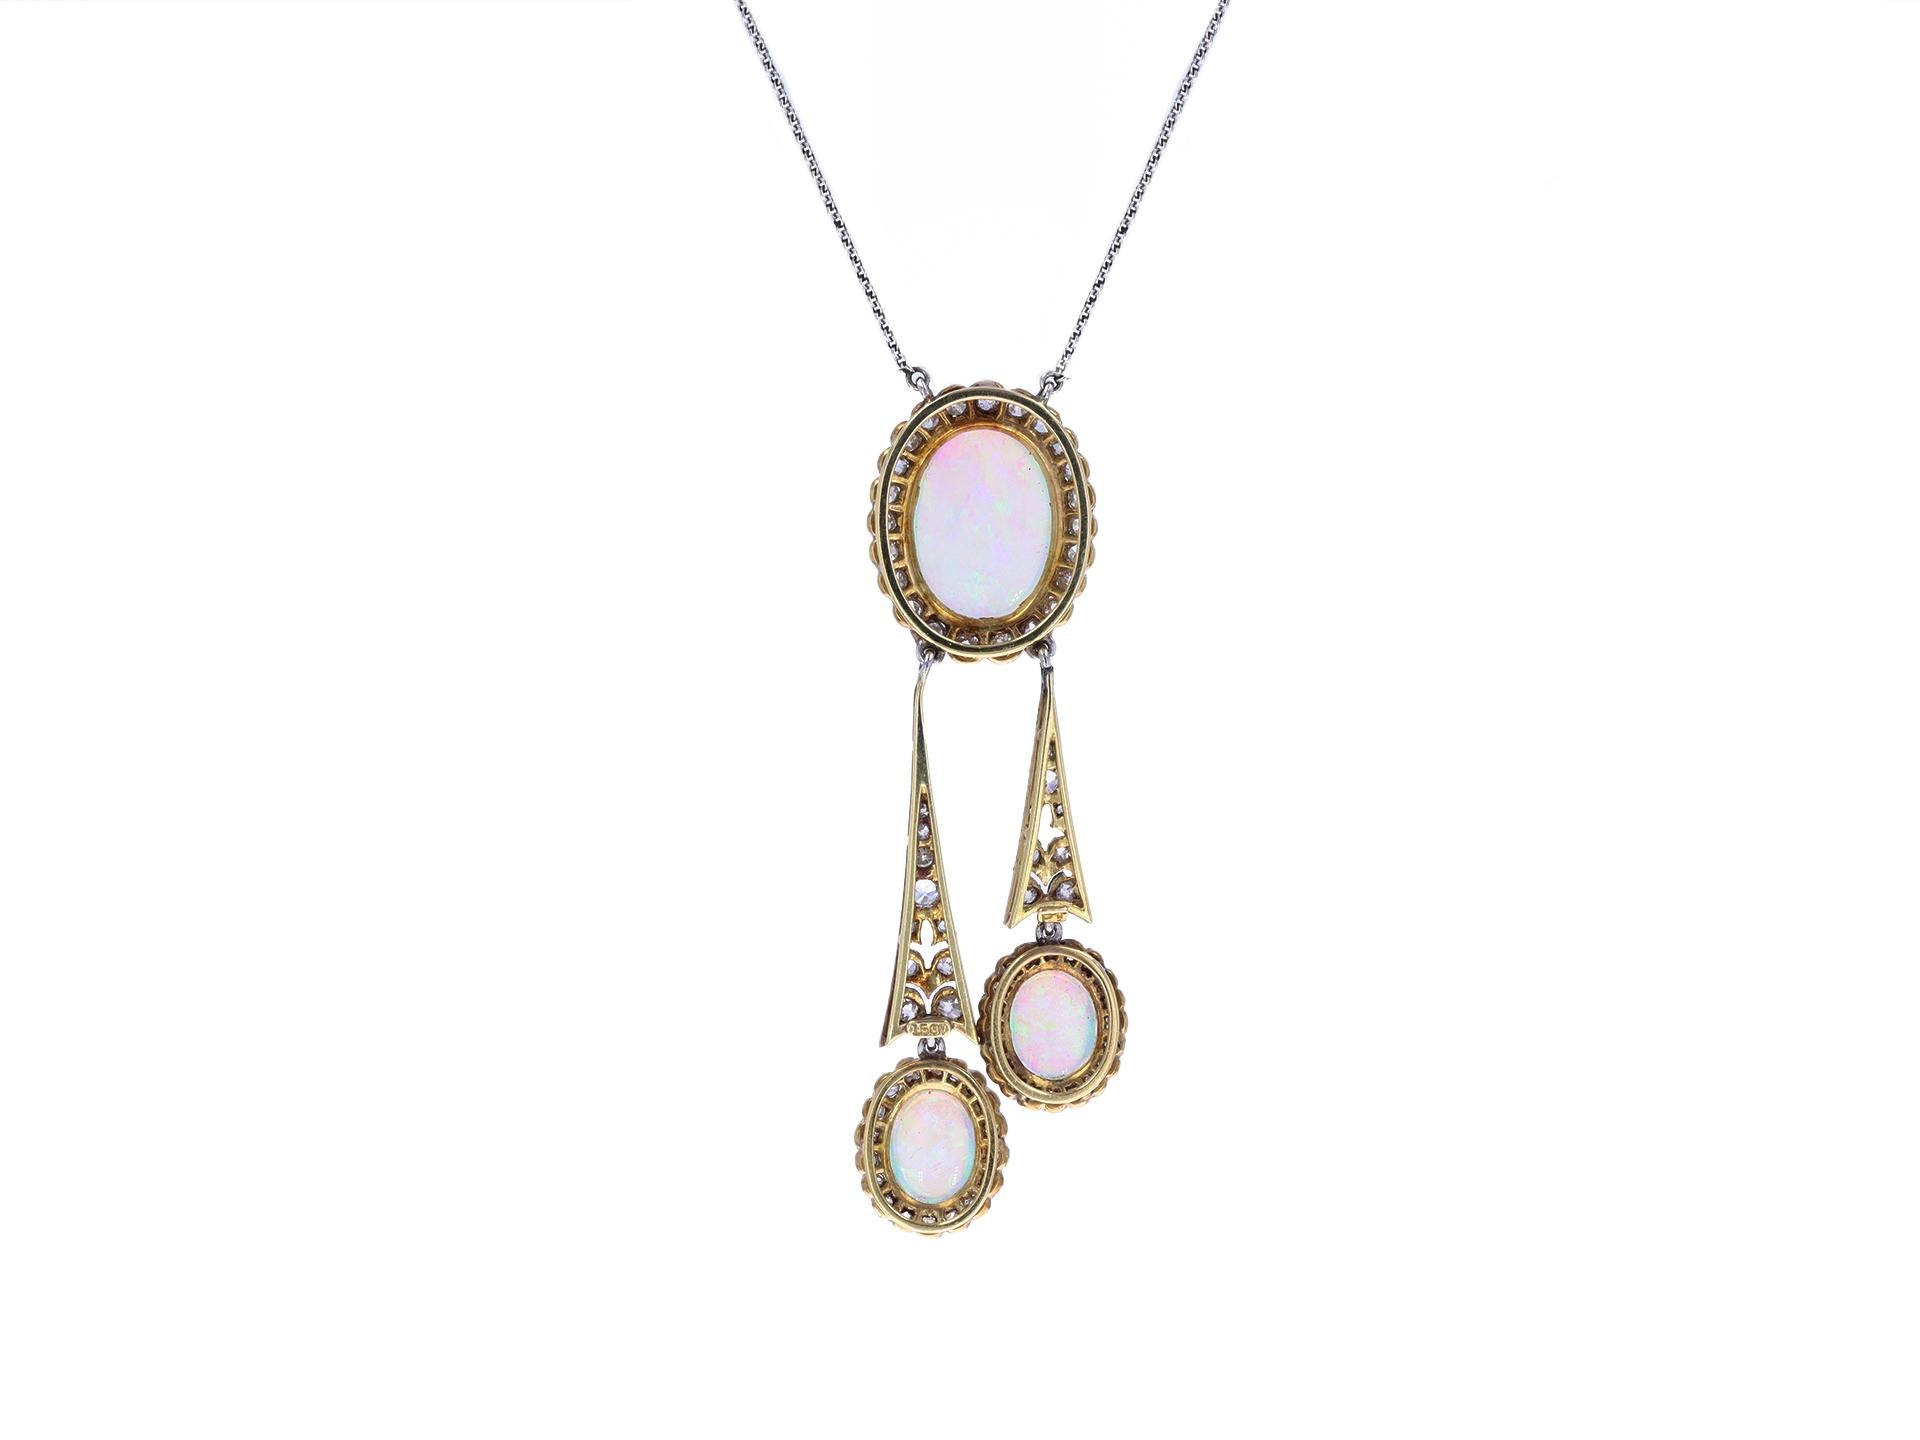 Opal and diamond negligée necklace. Centrally set with an oval cabochon natural opal in a open back rubover setting with an approximate weight of 3.90 carats, further set with two oval cabochon natural opals in open back rubover settings with a